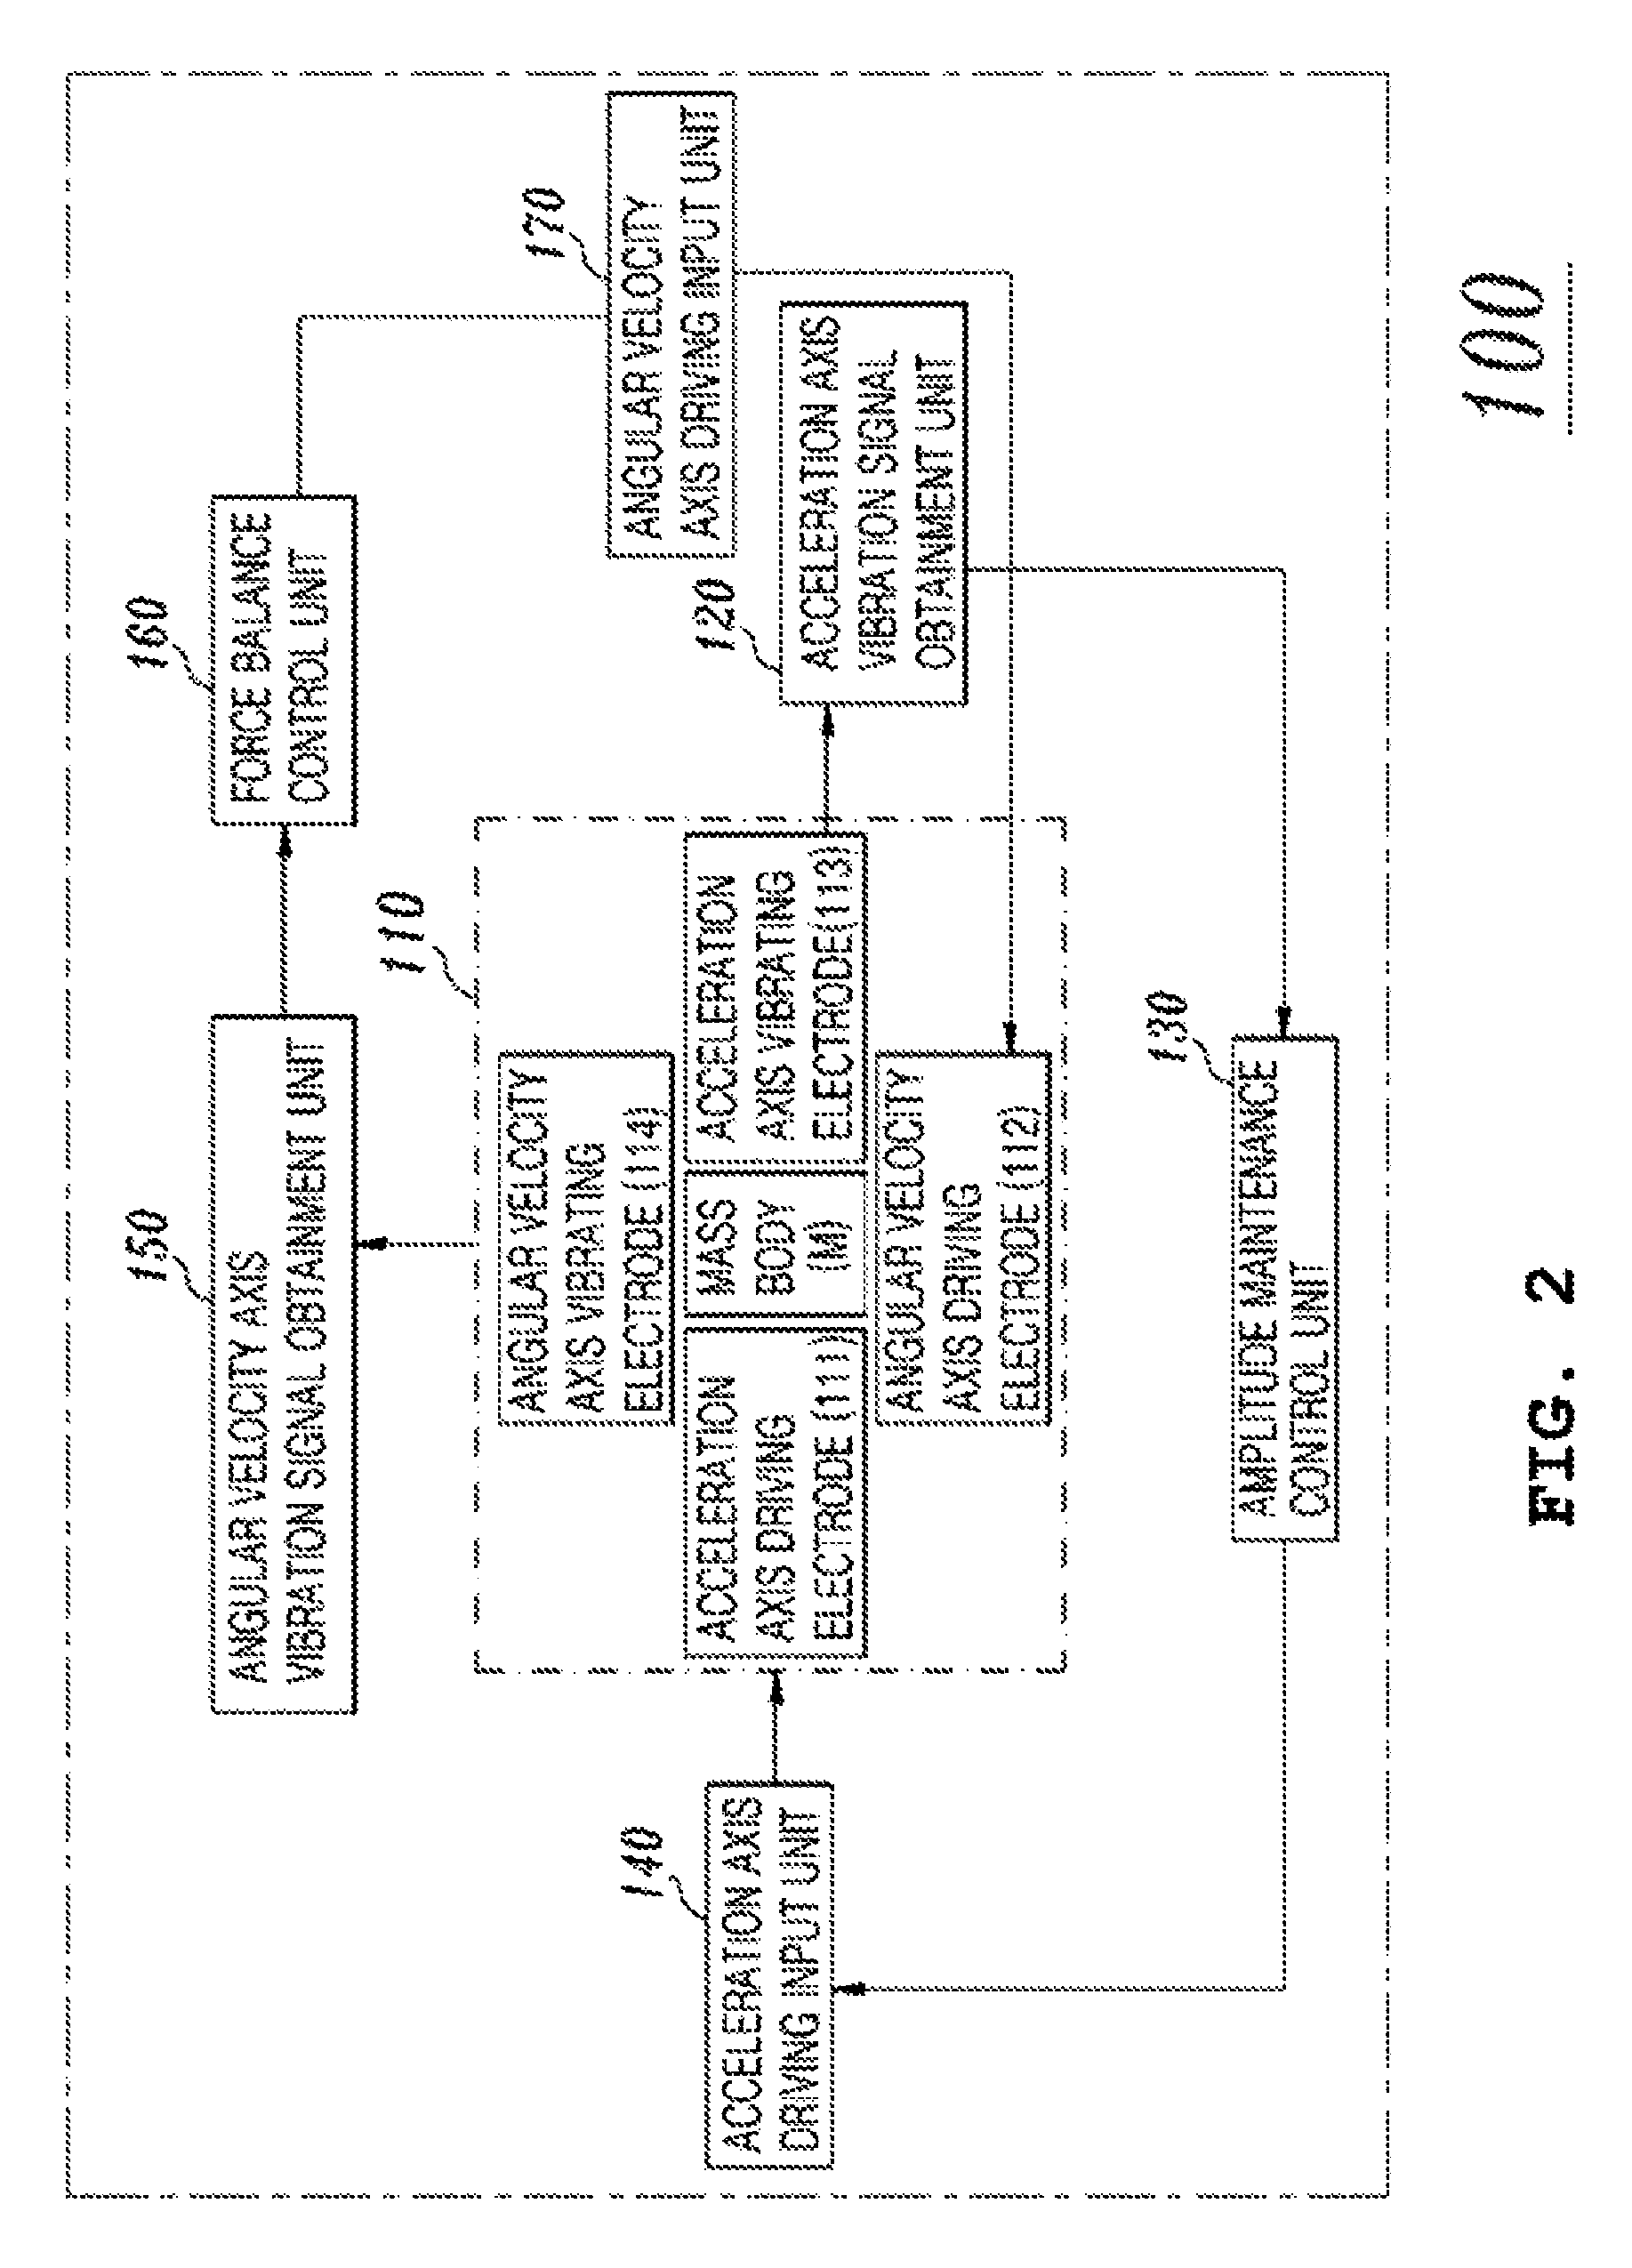 Combined accelerometer and gyroscope system